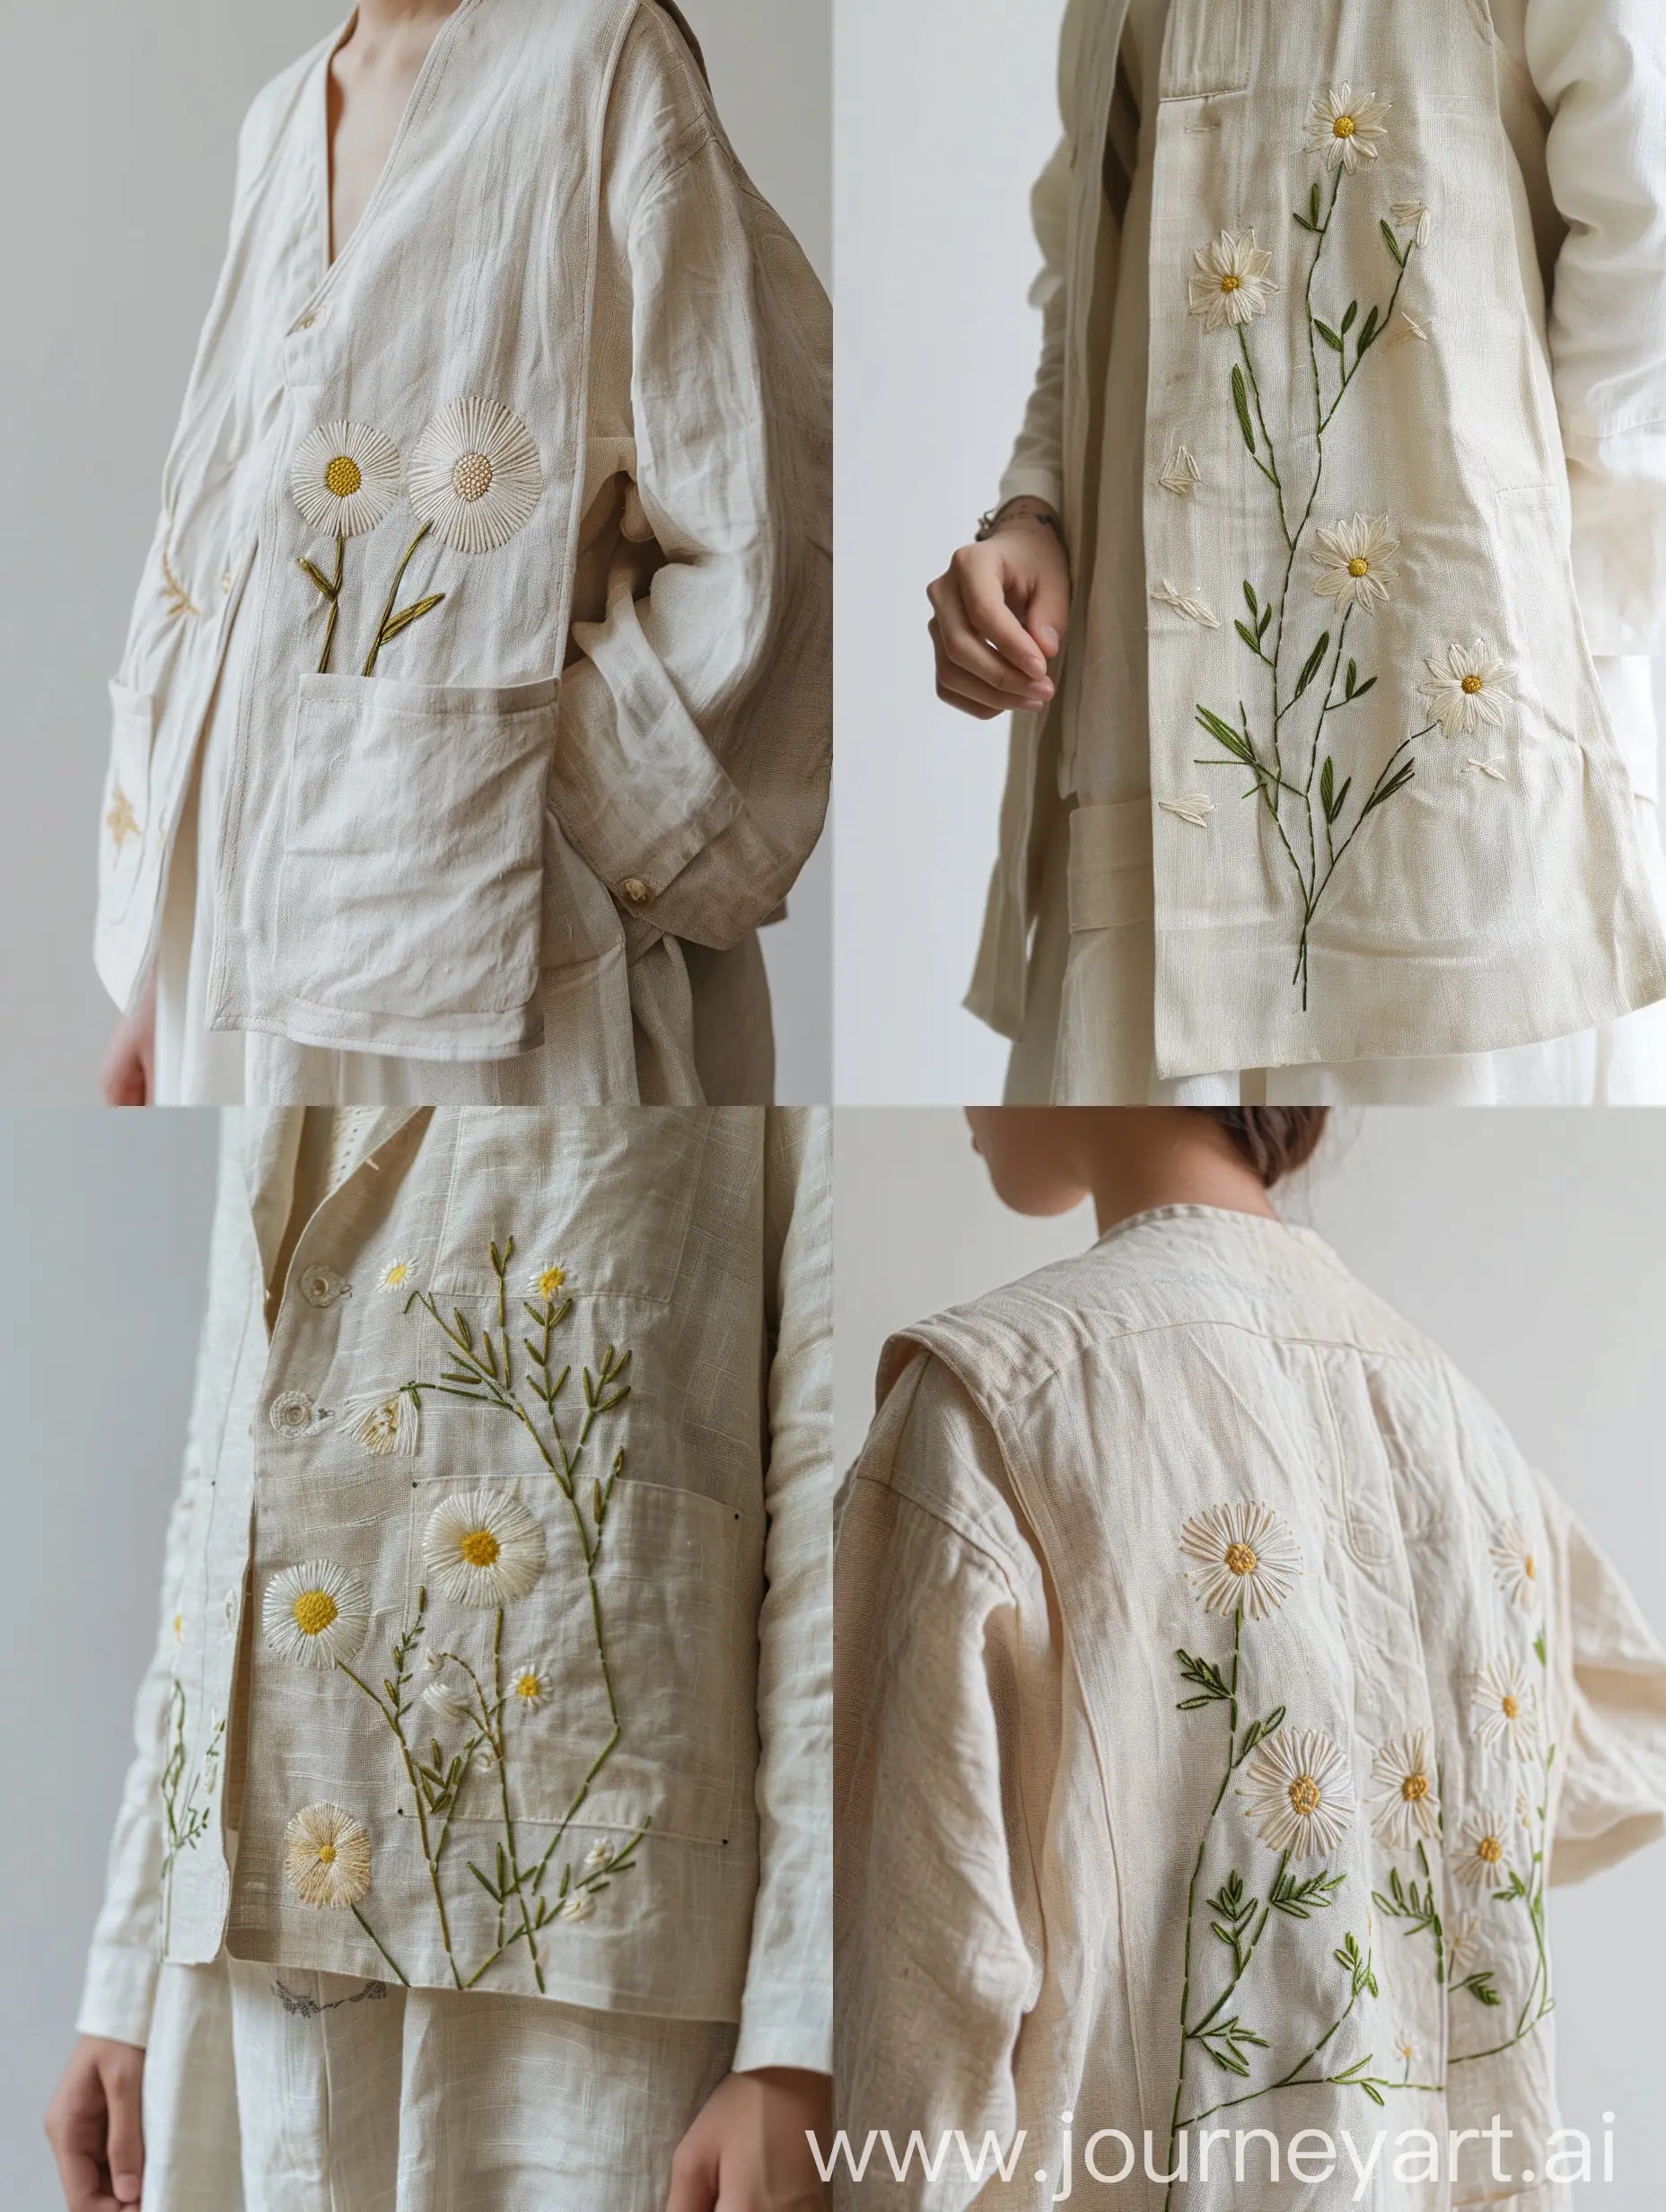 Jacket and vest, with embroidery, cream color, linen material, handmade embroidery design of chamomile flower, with small and low embroidery on one side.